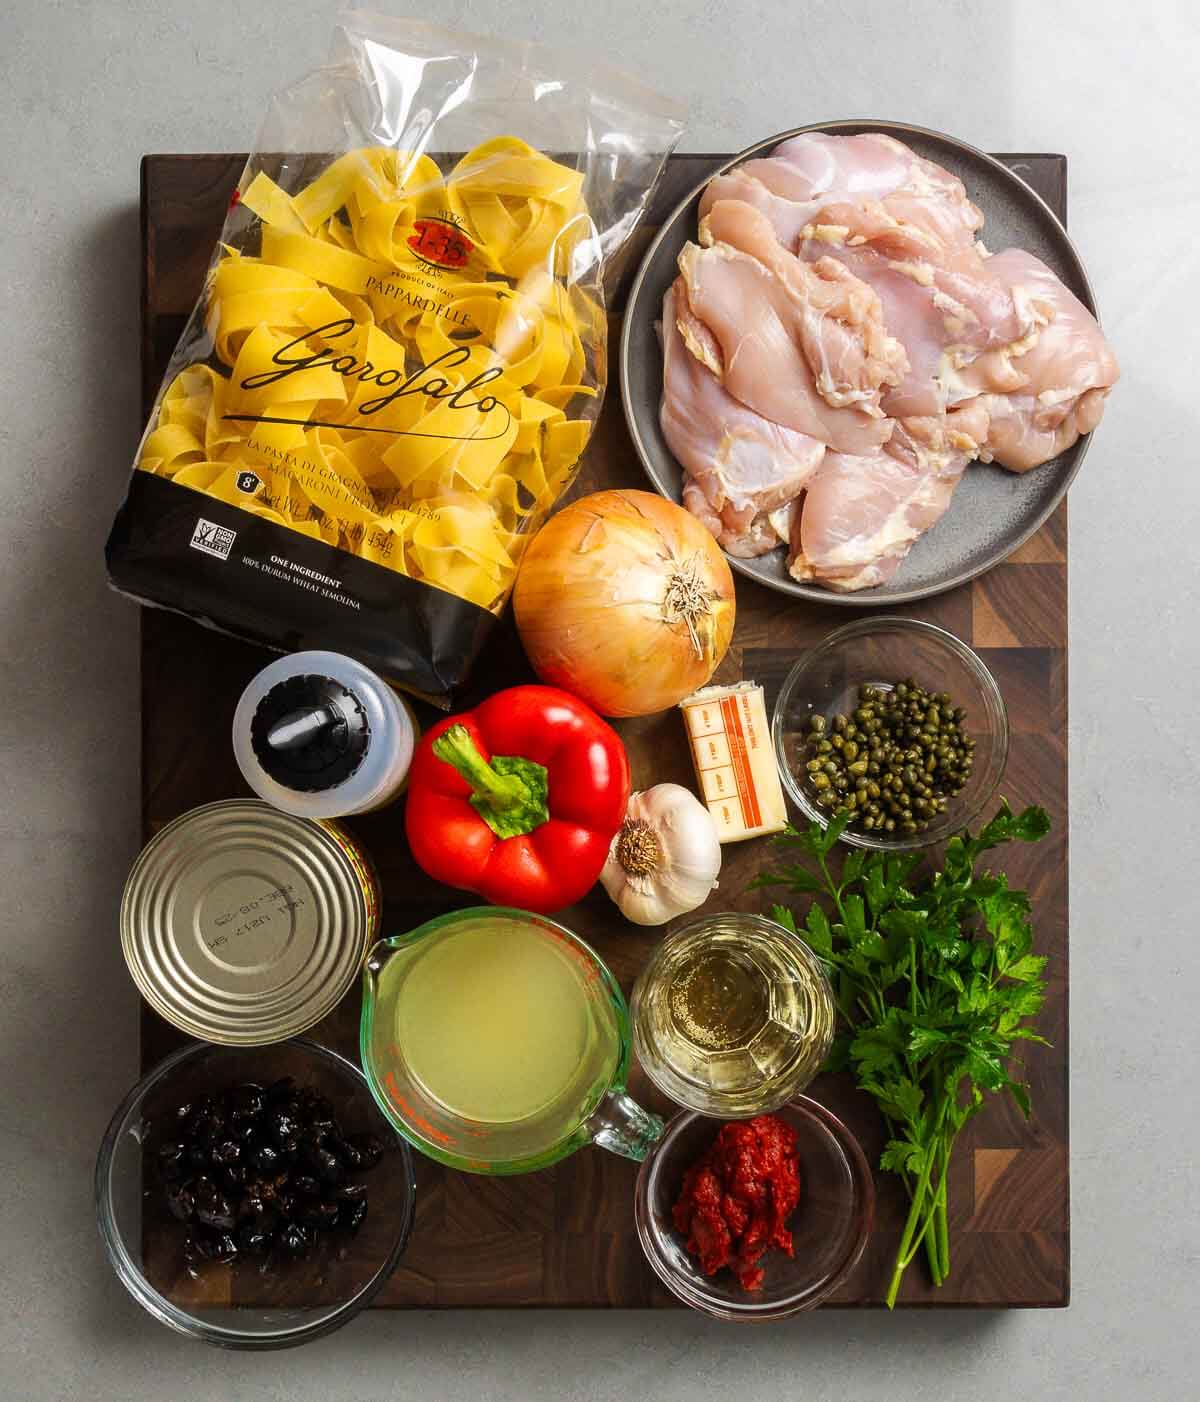 Ingredients shown: pappardelle, chicken thighs, onion, olive oil, bell pepper, garlic, butter, capers, tomatoes, chicken stock, olives, white wine, tomato paste, and parsley.